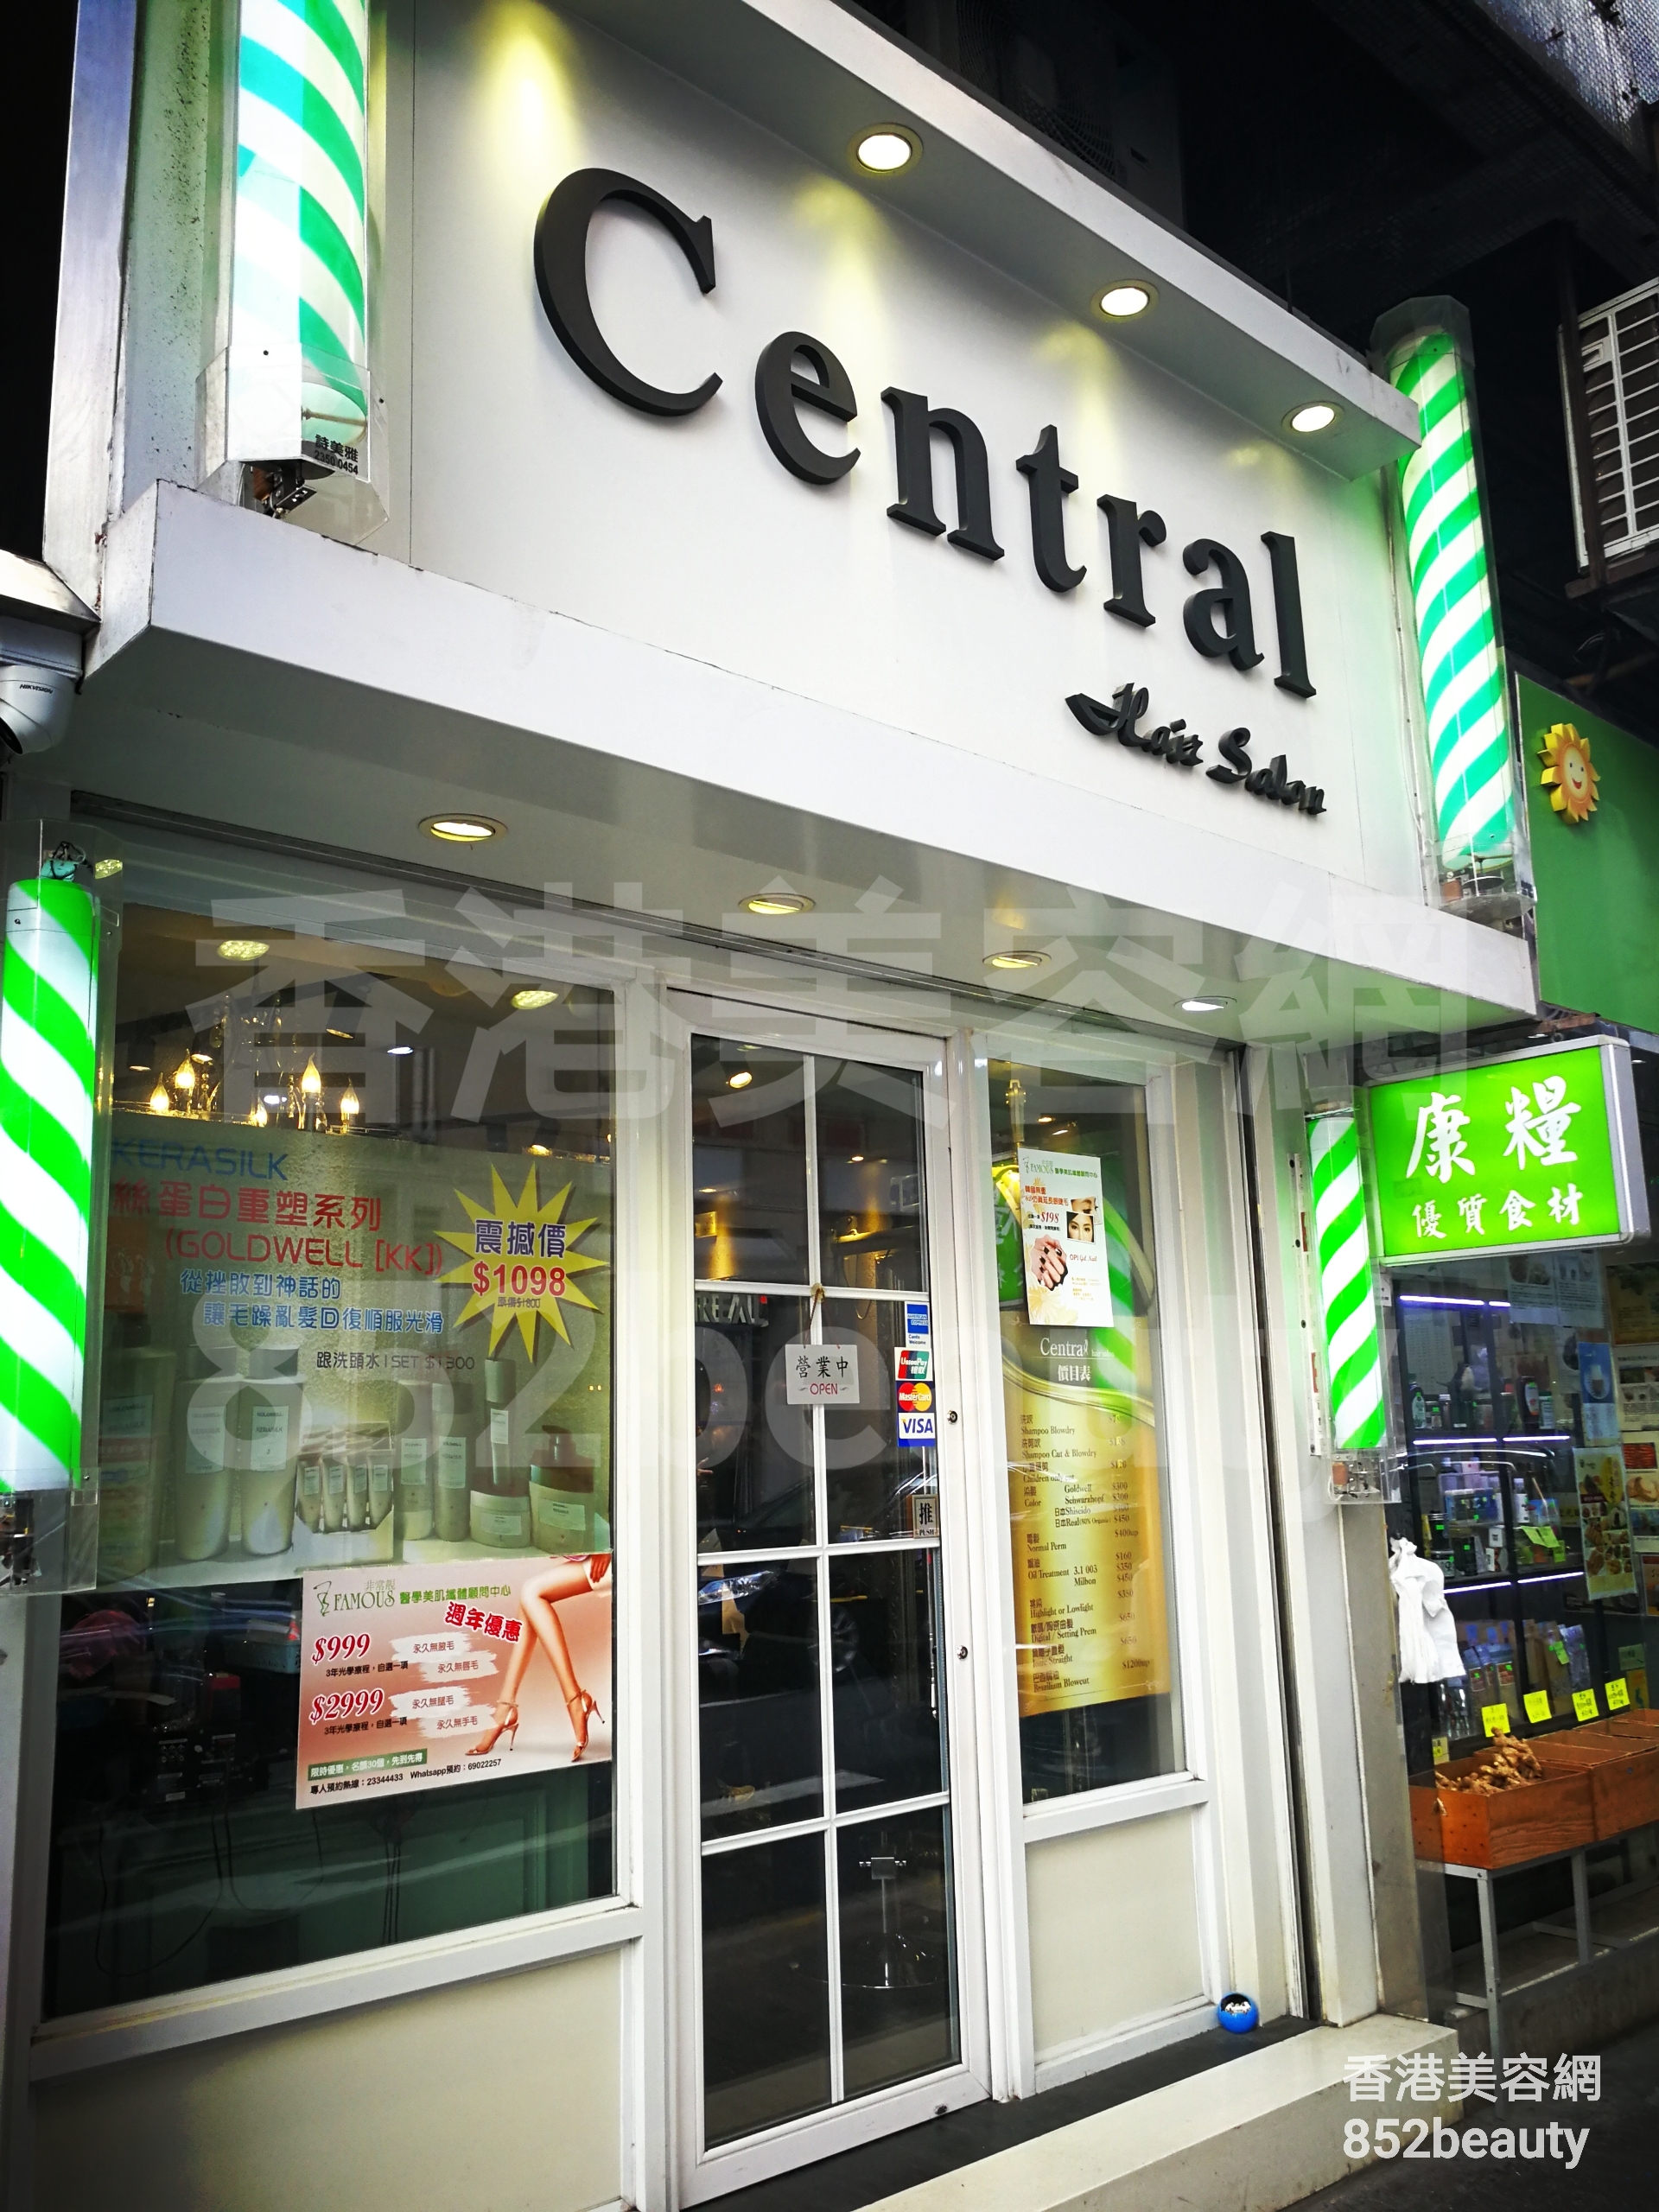 Slimming: Central